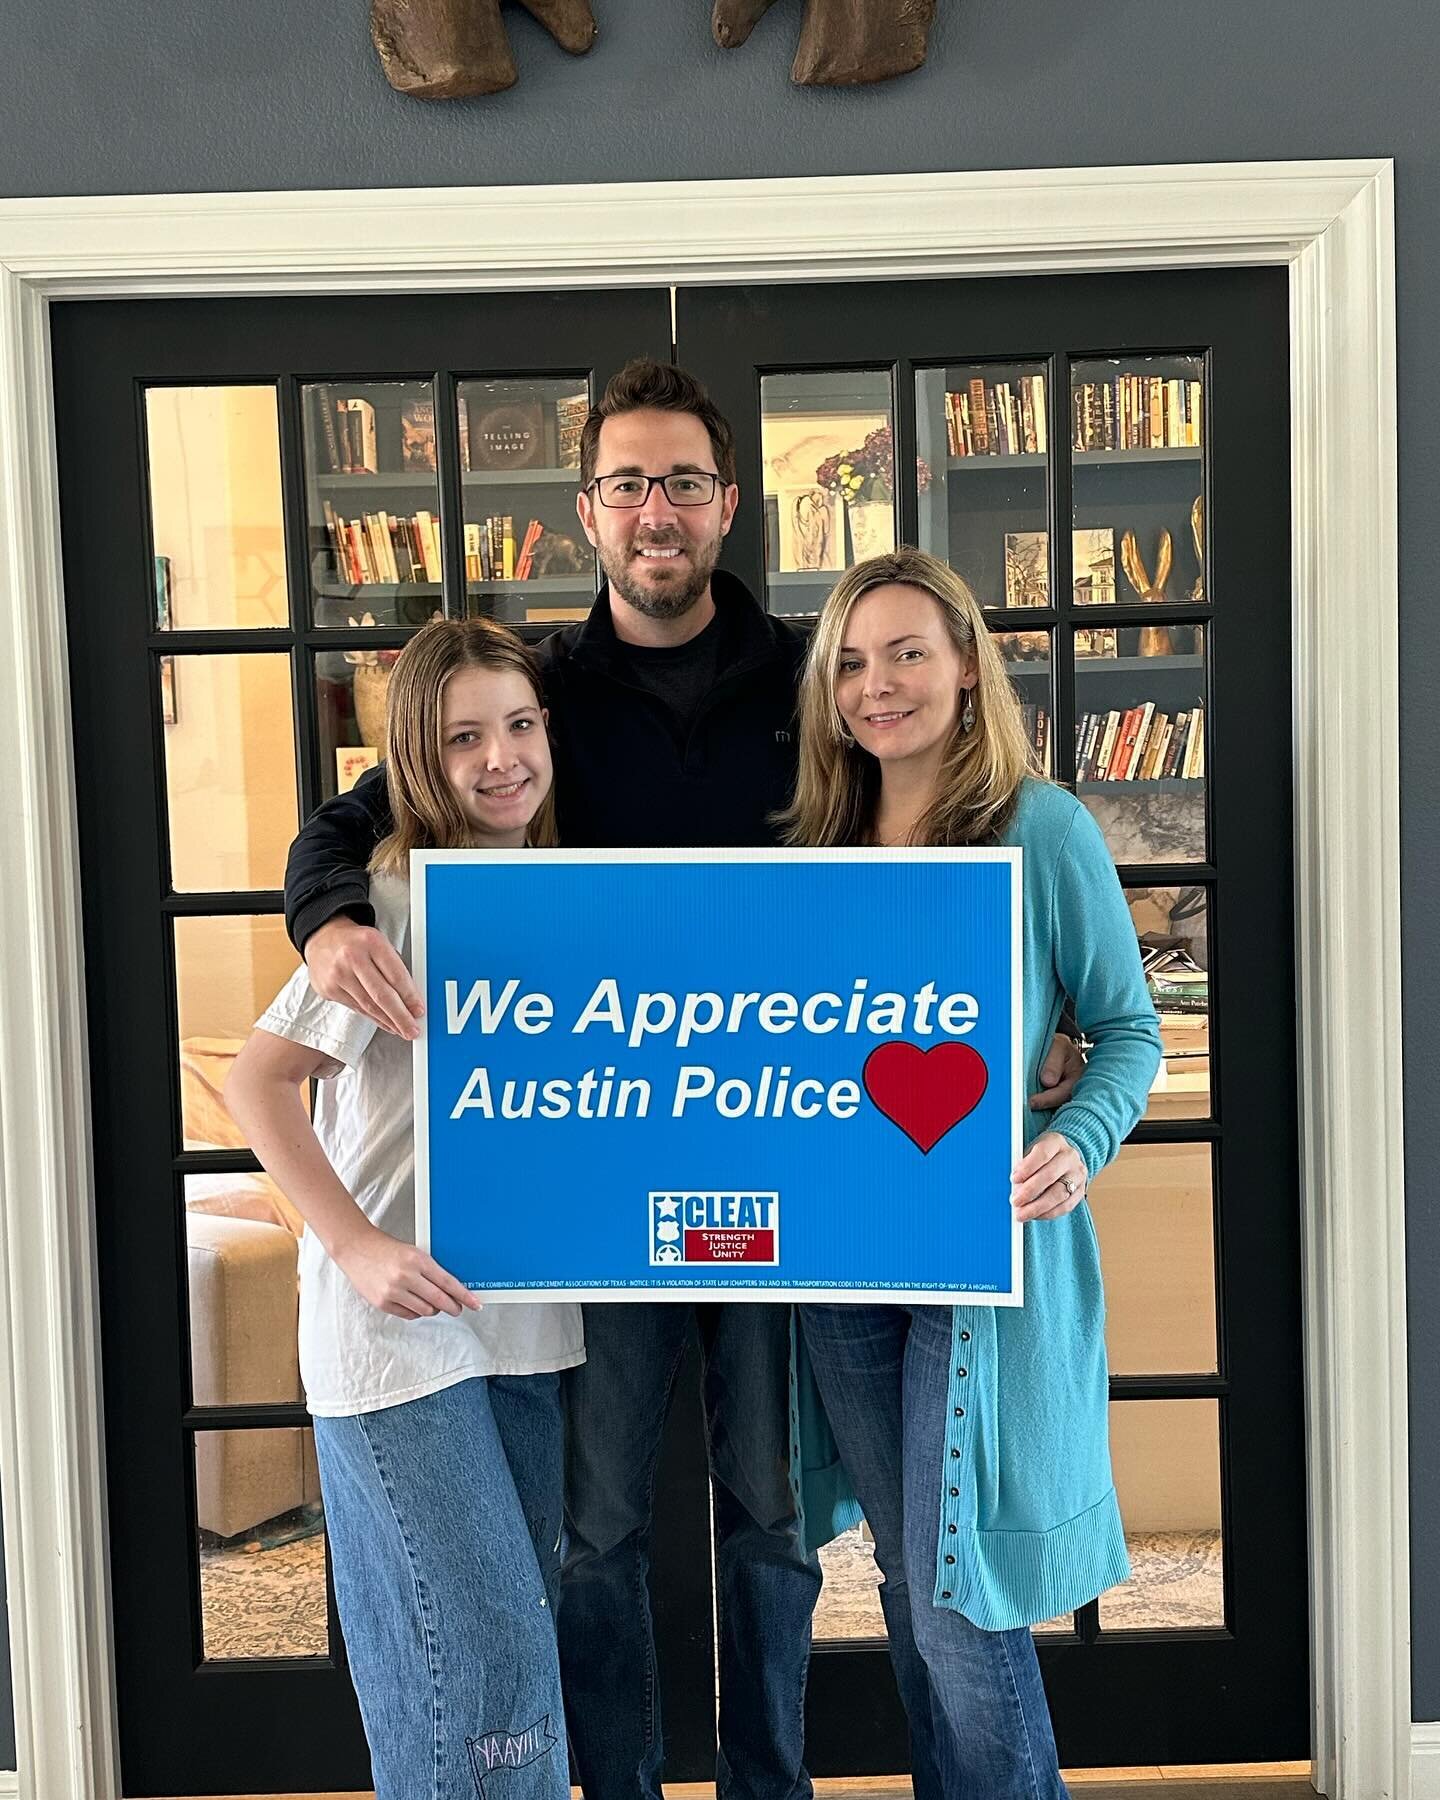 Dr Scott and his family appreciate and support the Austin police, and all men and women in uniform throughout Texas. 

#Austin #support #texas @cleat_tx